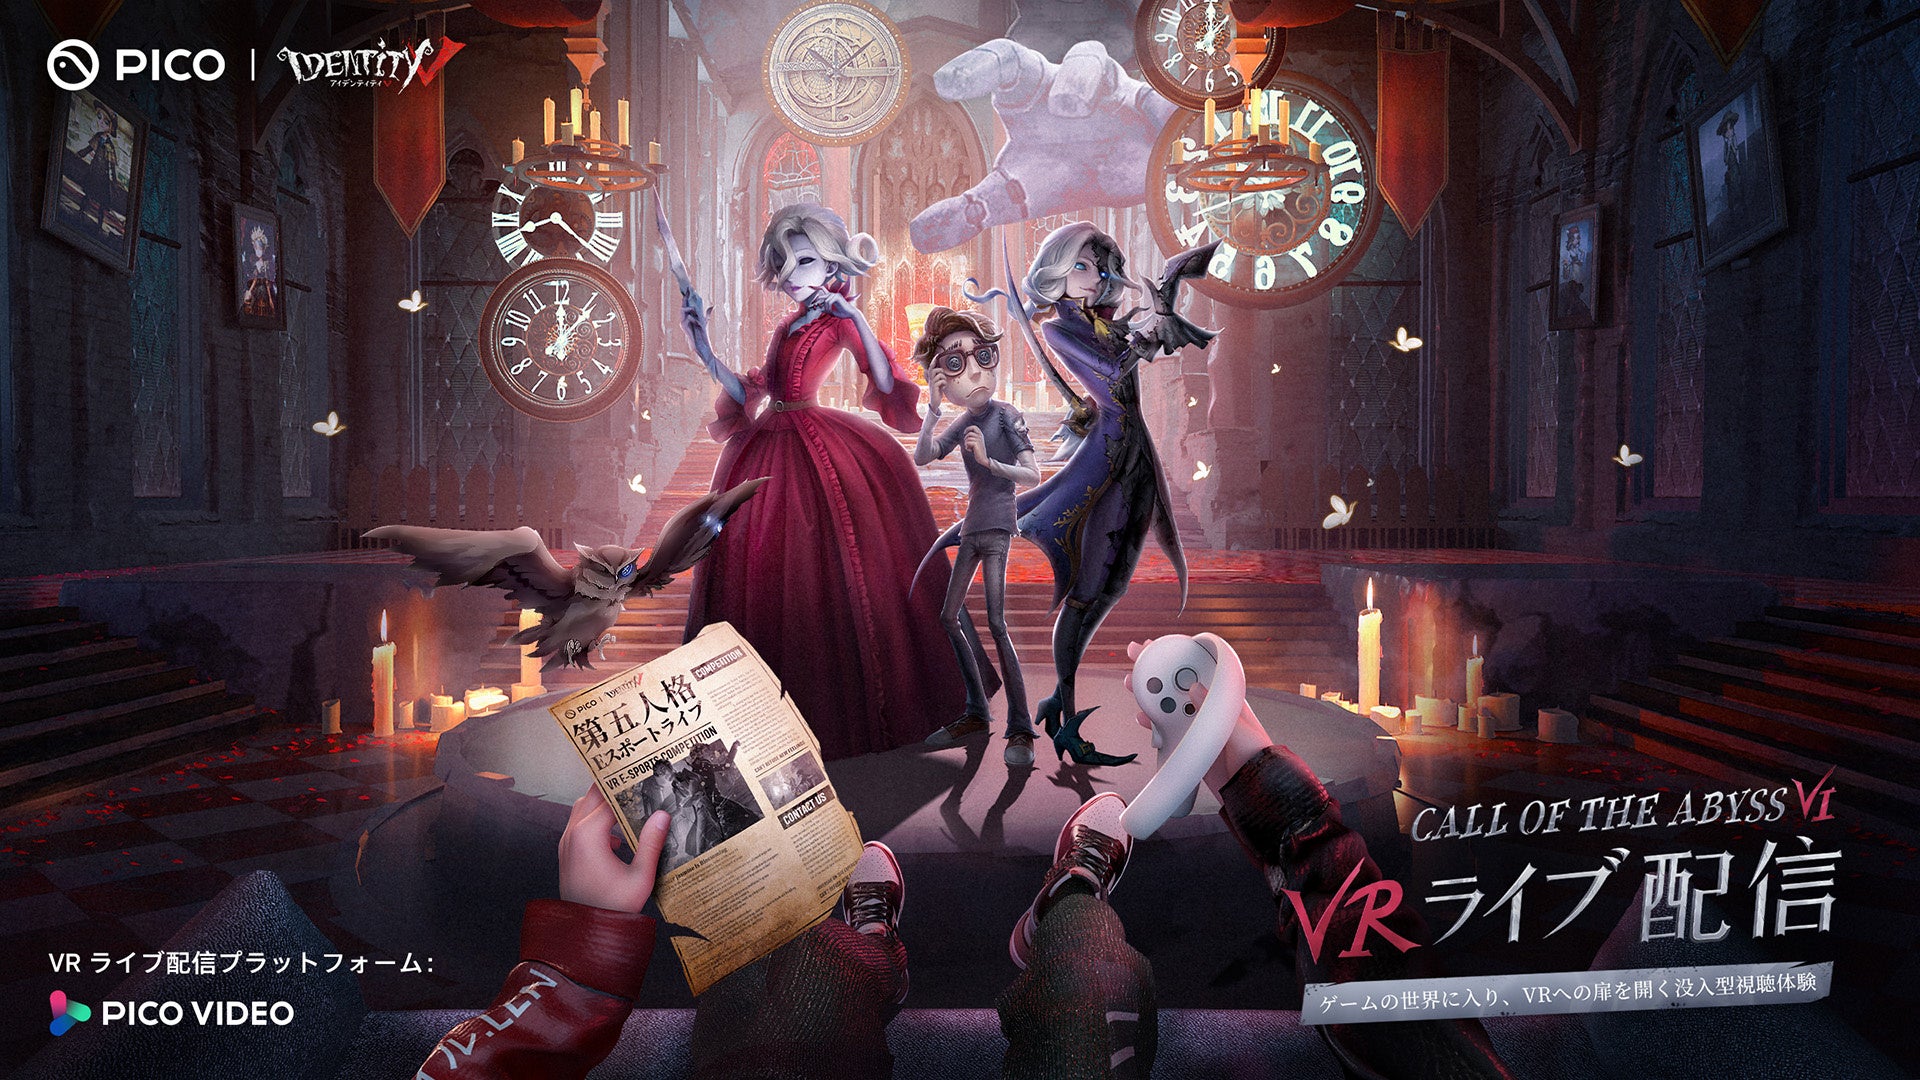 PICO、NetEase Game主催「Identity V」Call of the Abyss VI大会のVR LIVE配信を開始